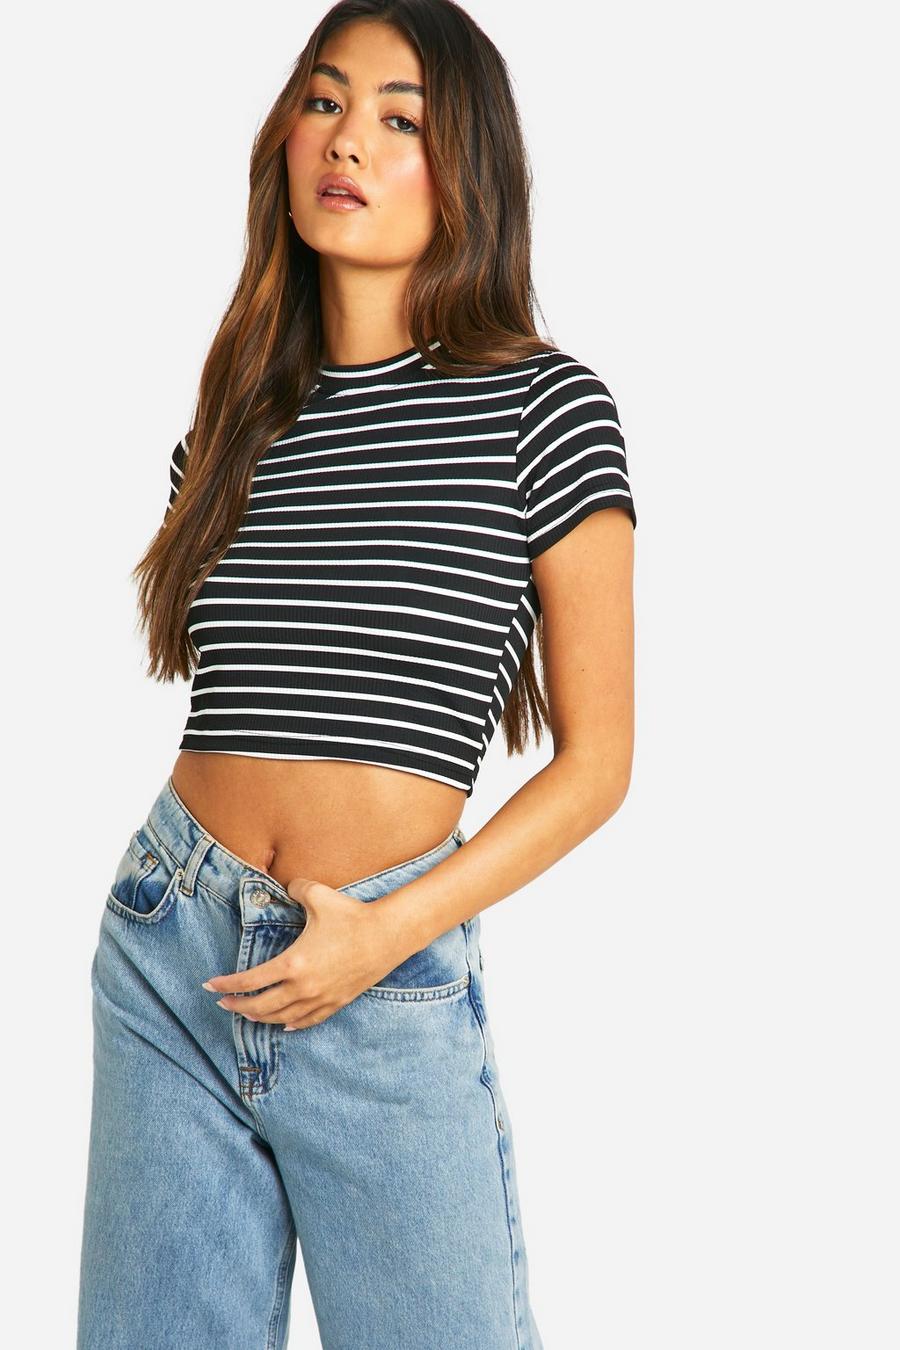 Black Striped Collared Open Back Short Sleeve Crop Top 